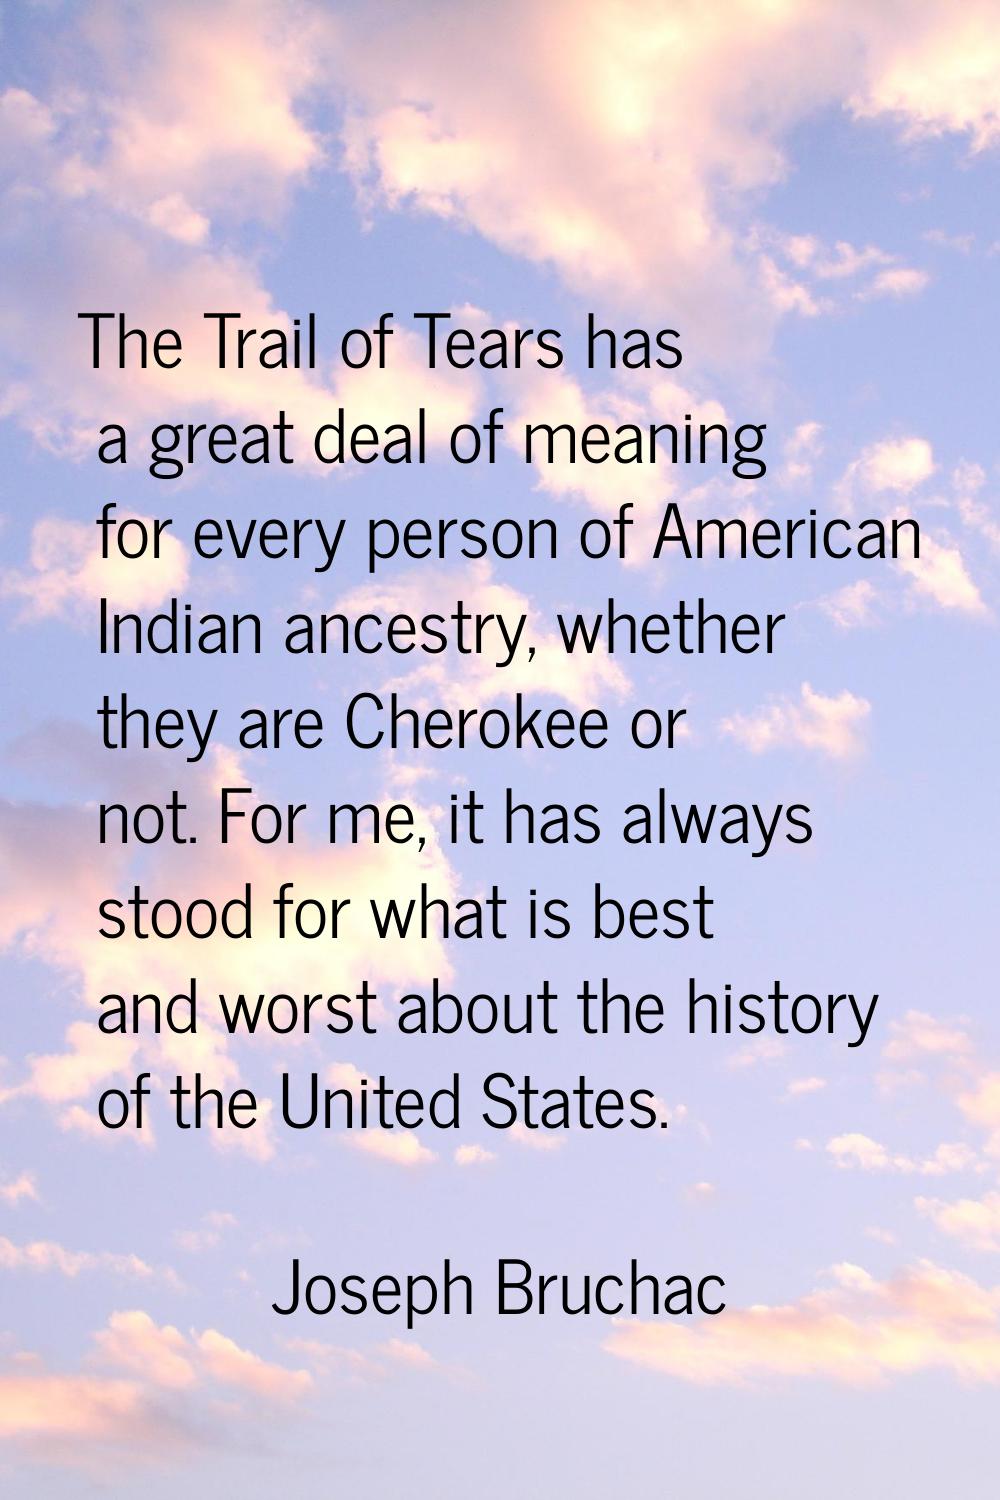 The Trail of Tears has a great deal of meaning for every person of American Indian ancestry, whethe